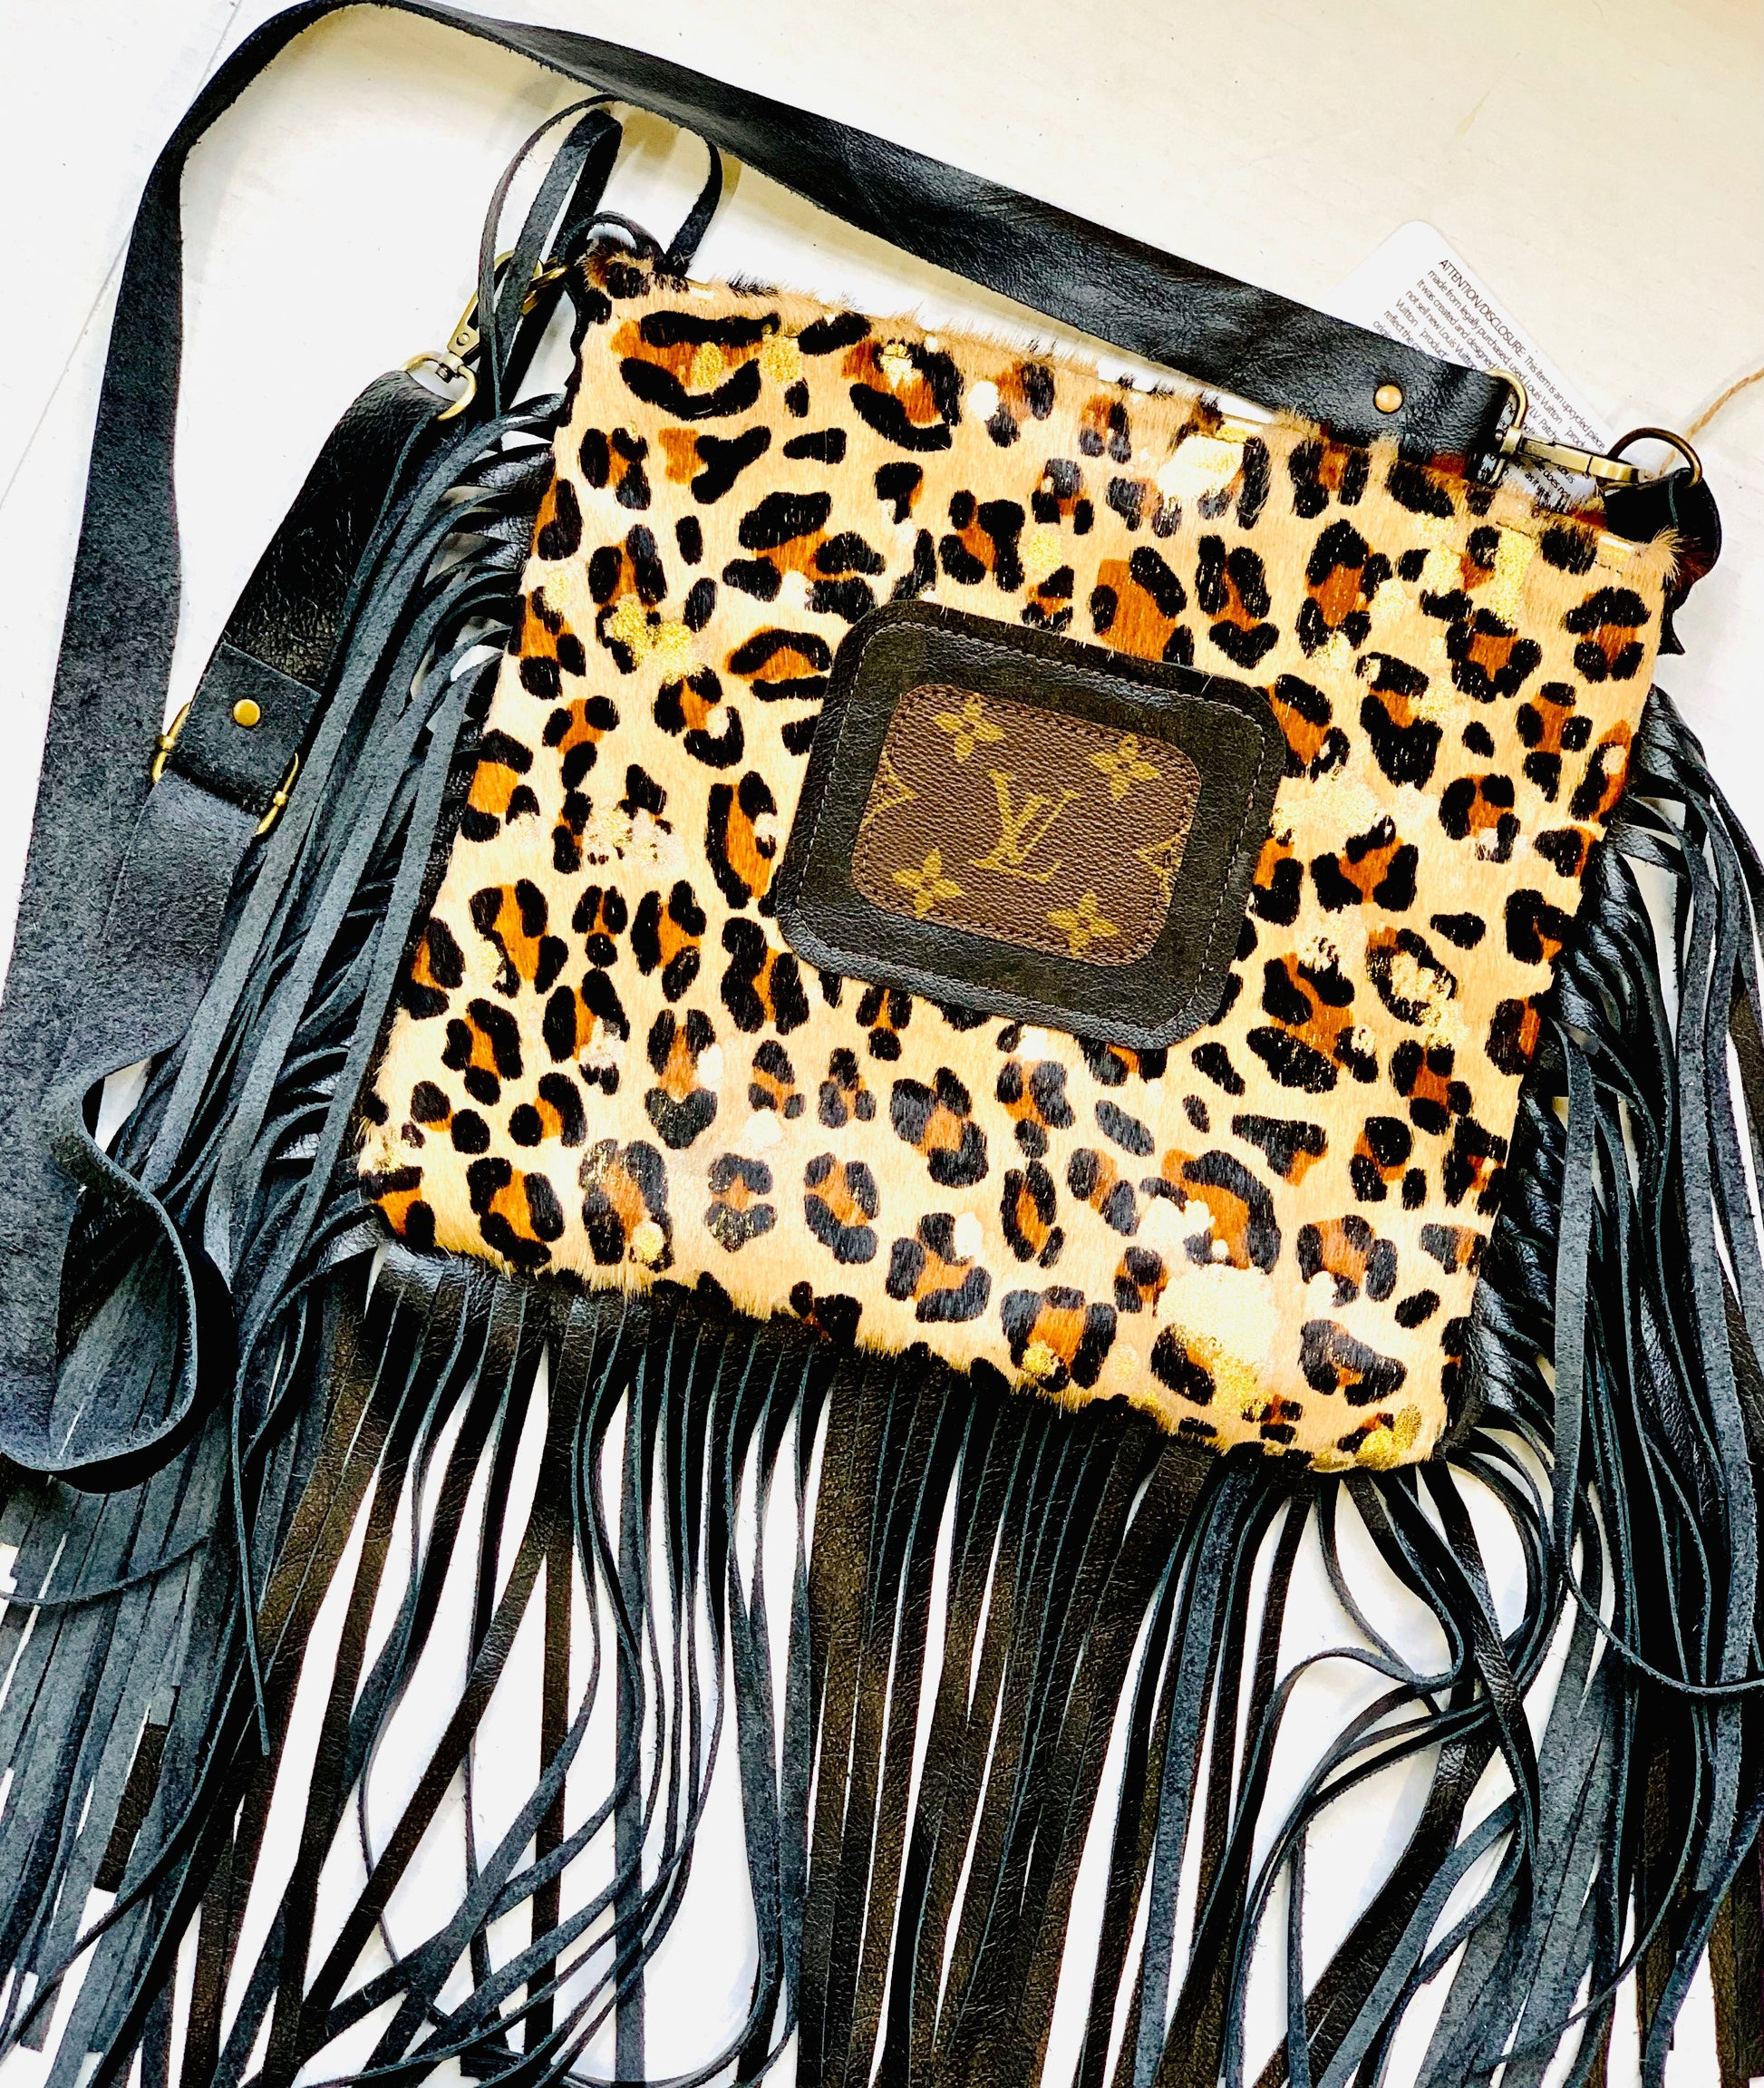 Medium Crossbody in Leopard - Patch in Black - Patches Of Upcycling